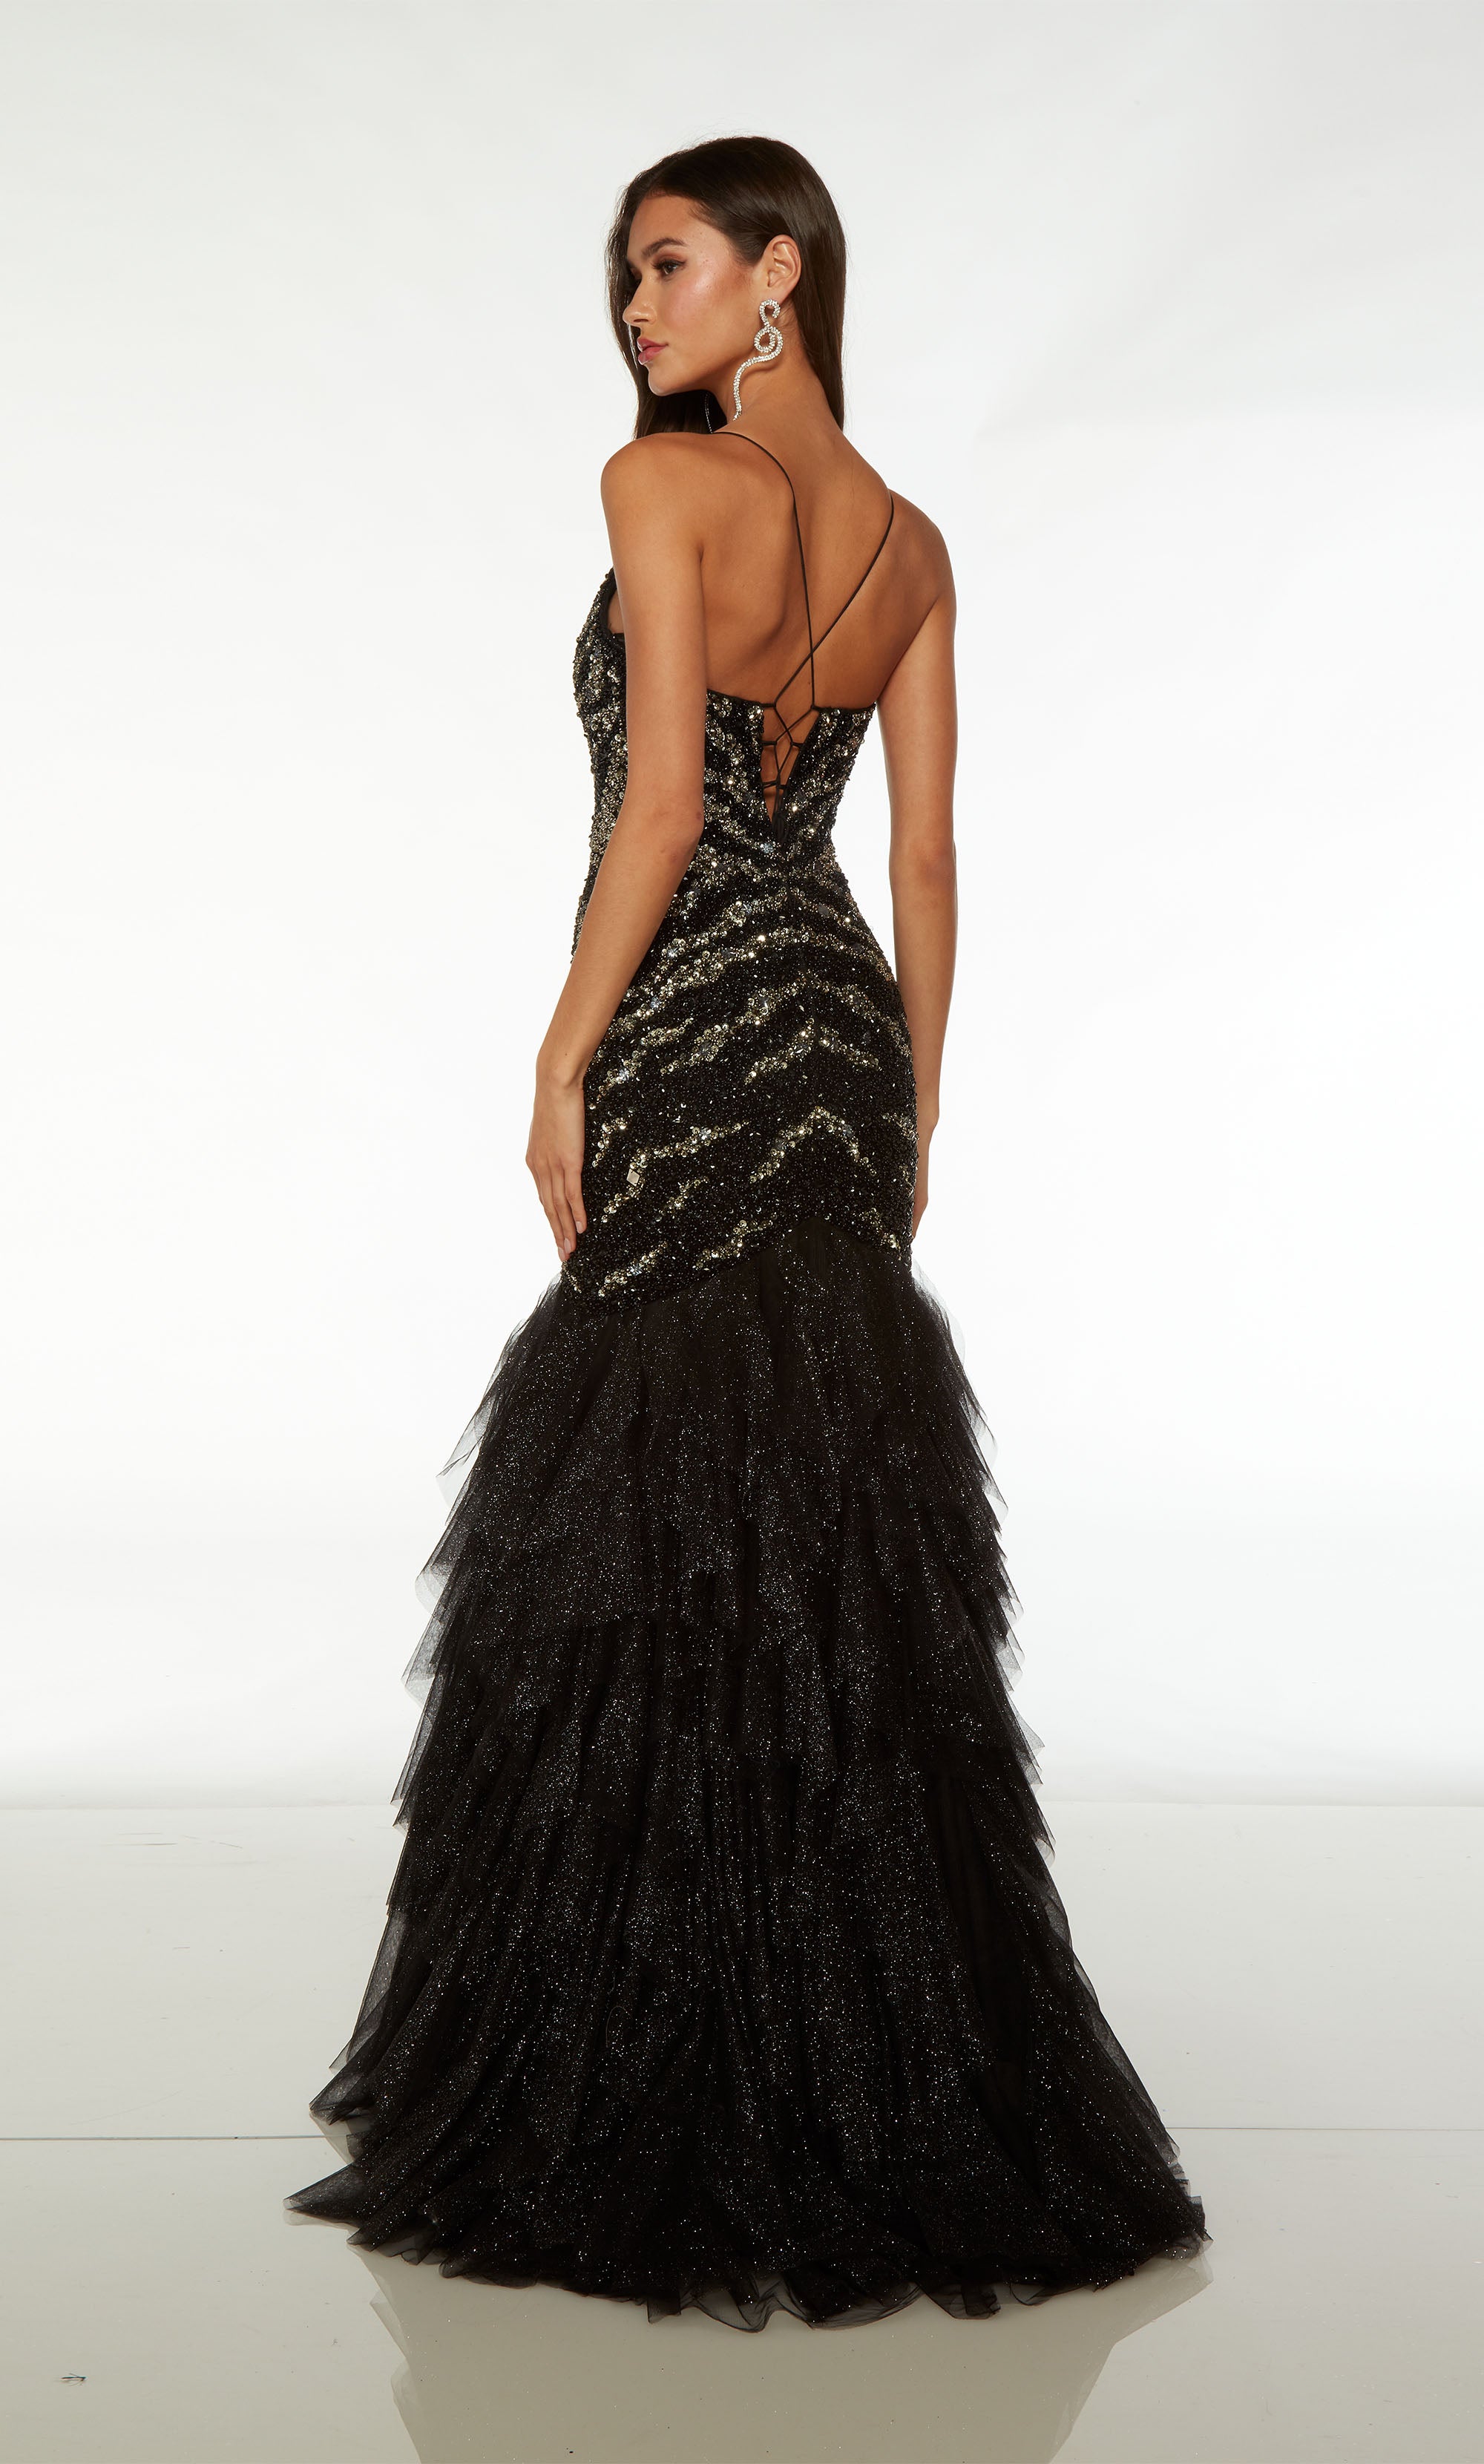 Black and silver hand-beaded mermaid dress: plunging neckline, spaghetti straps, crisscross lace-up back, and ruffle detail on the skirt.